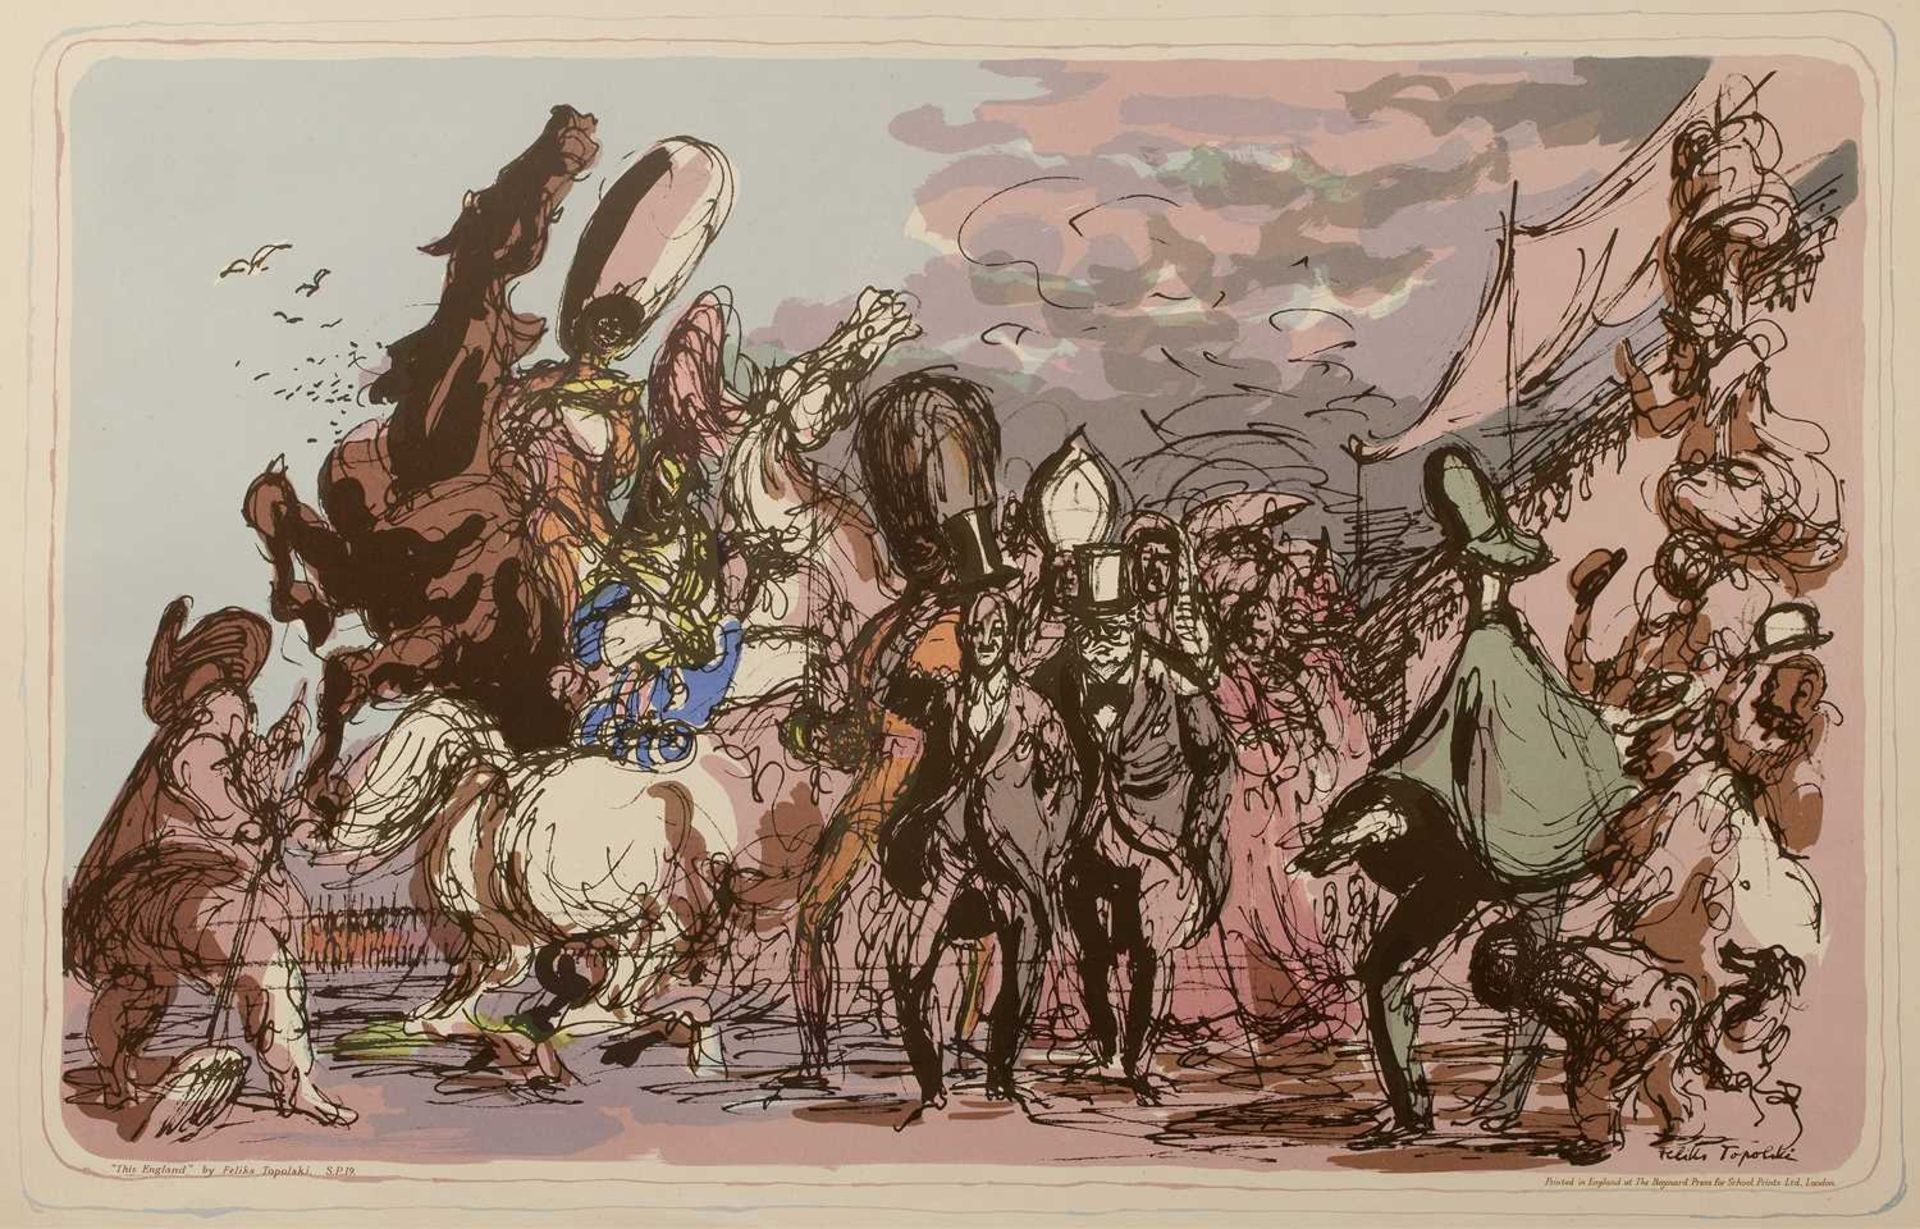 Charles Mozley (1915-1991) The Ballet from the series School Prints lithograph printed at the - Image 2 of 2